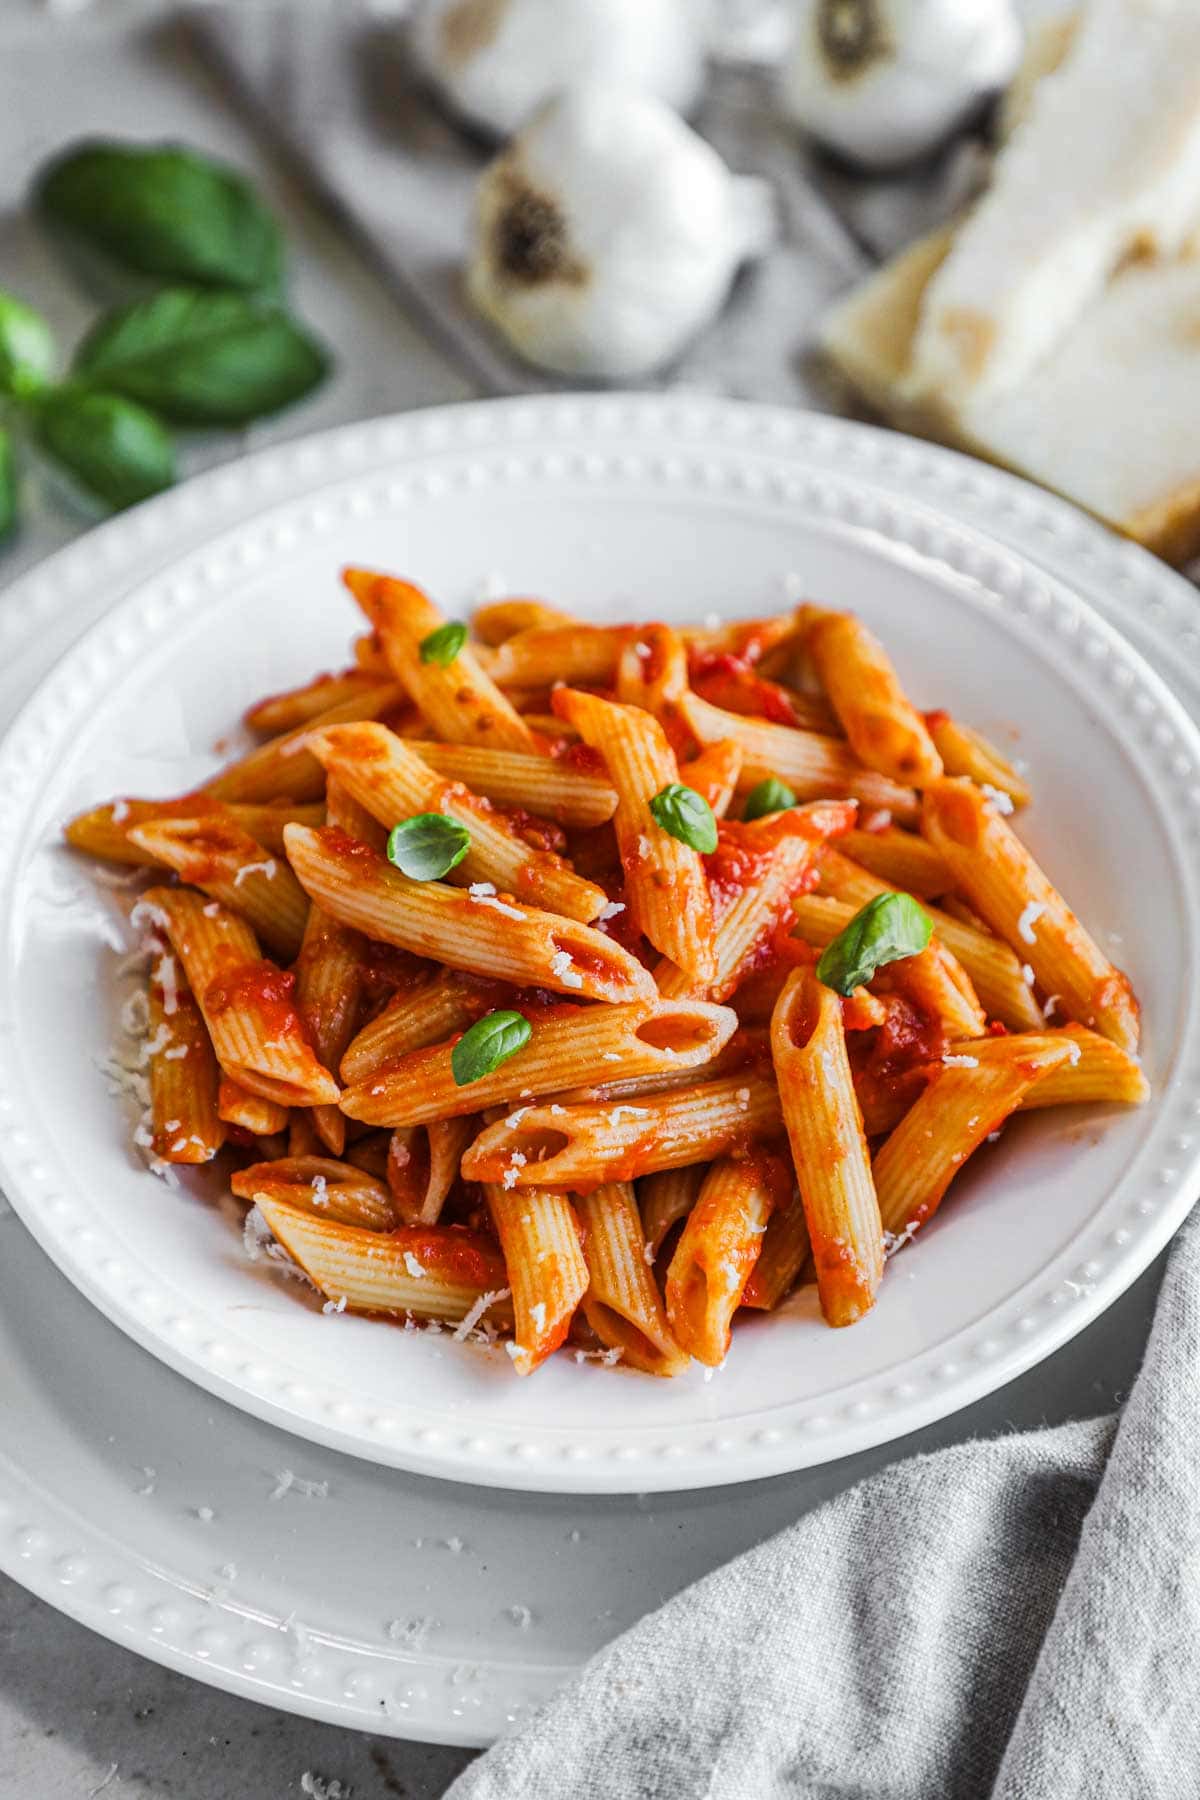 Authentic penne pomodoro made with San Marzano tomatoes and topped with parmigiano-reggiano.